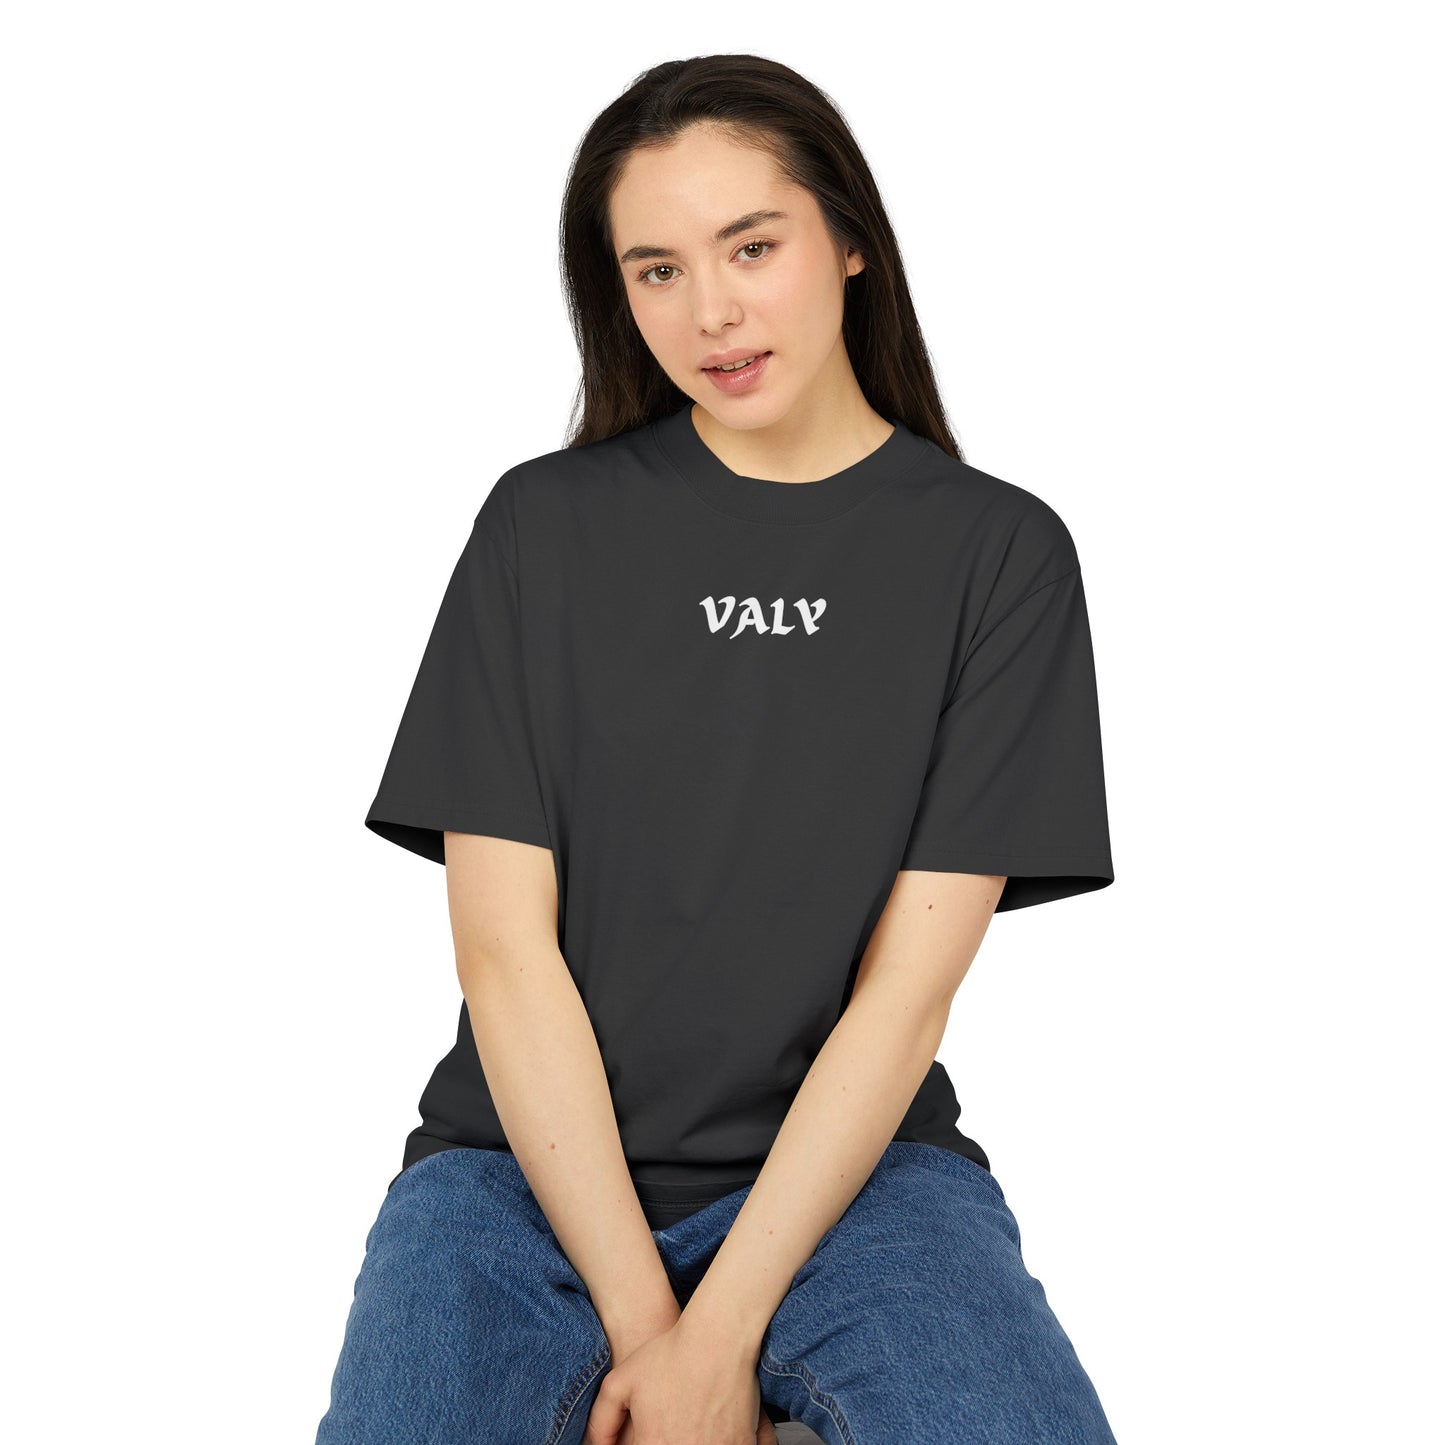 VALY Post-Workout T-Shirt - Faded Black